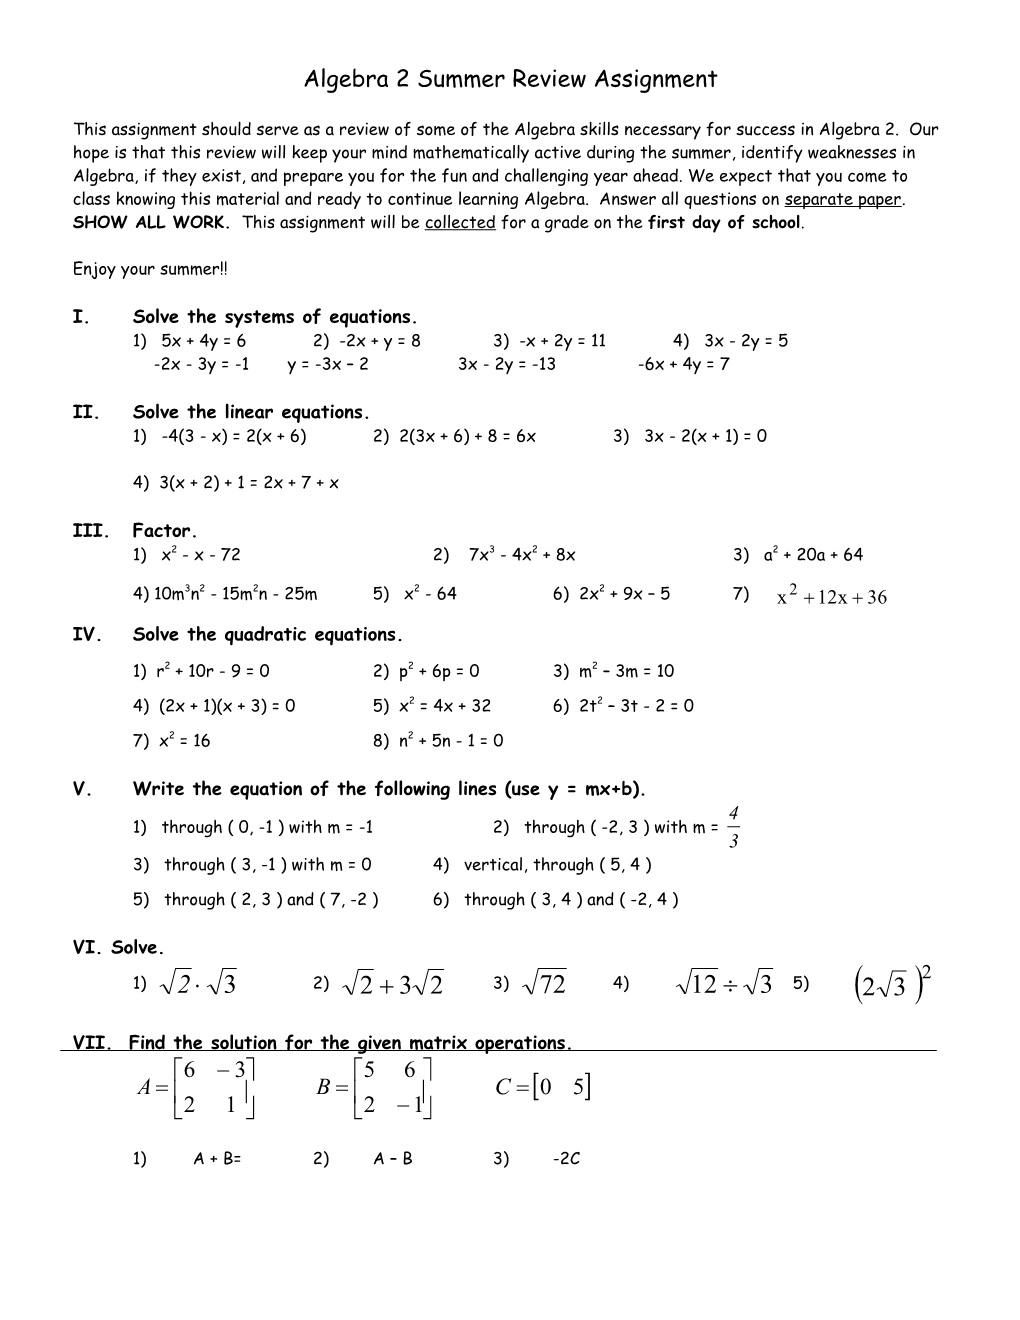 Algebra 2 with Analysis Summer Review Assignment